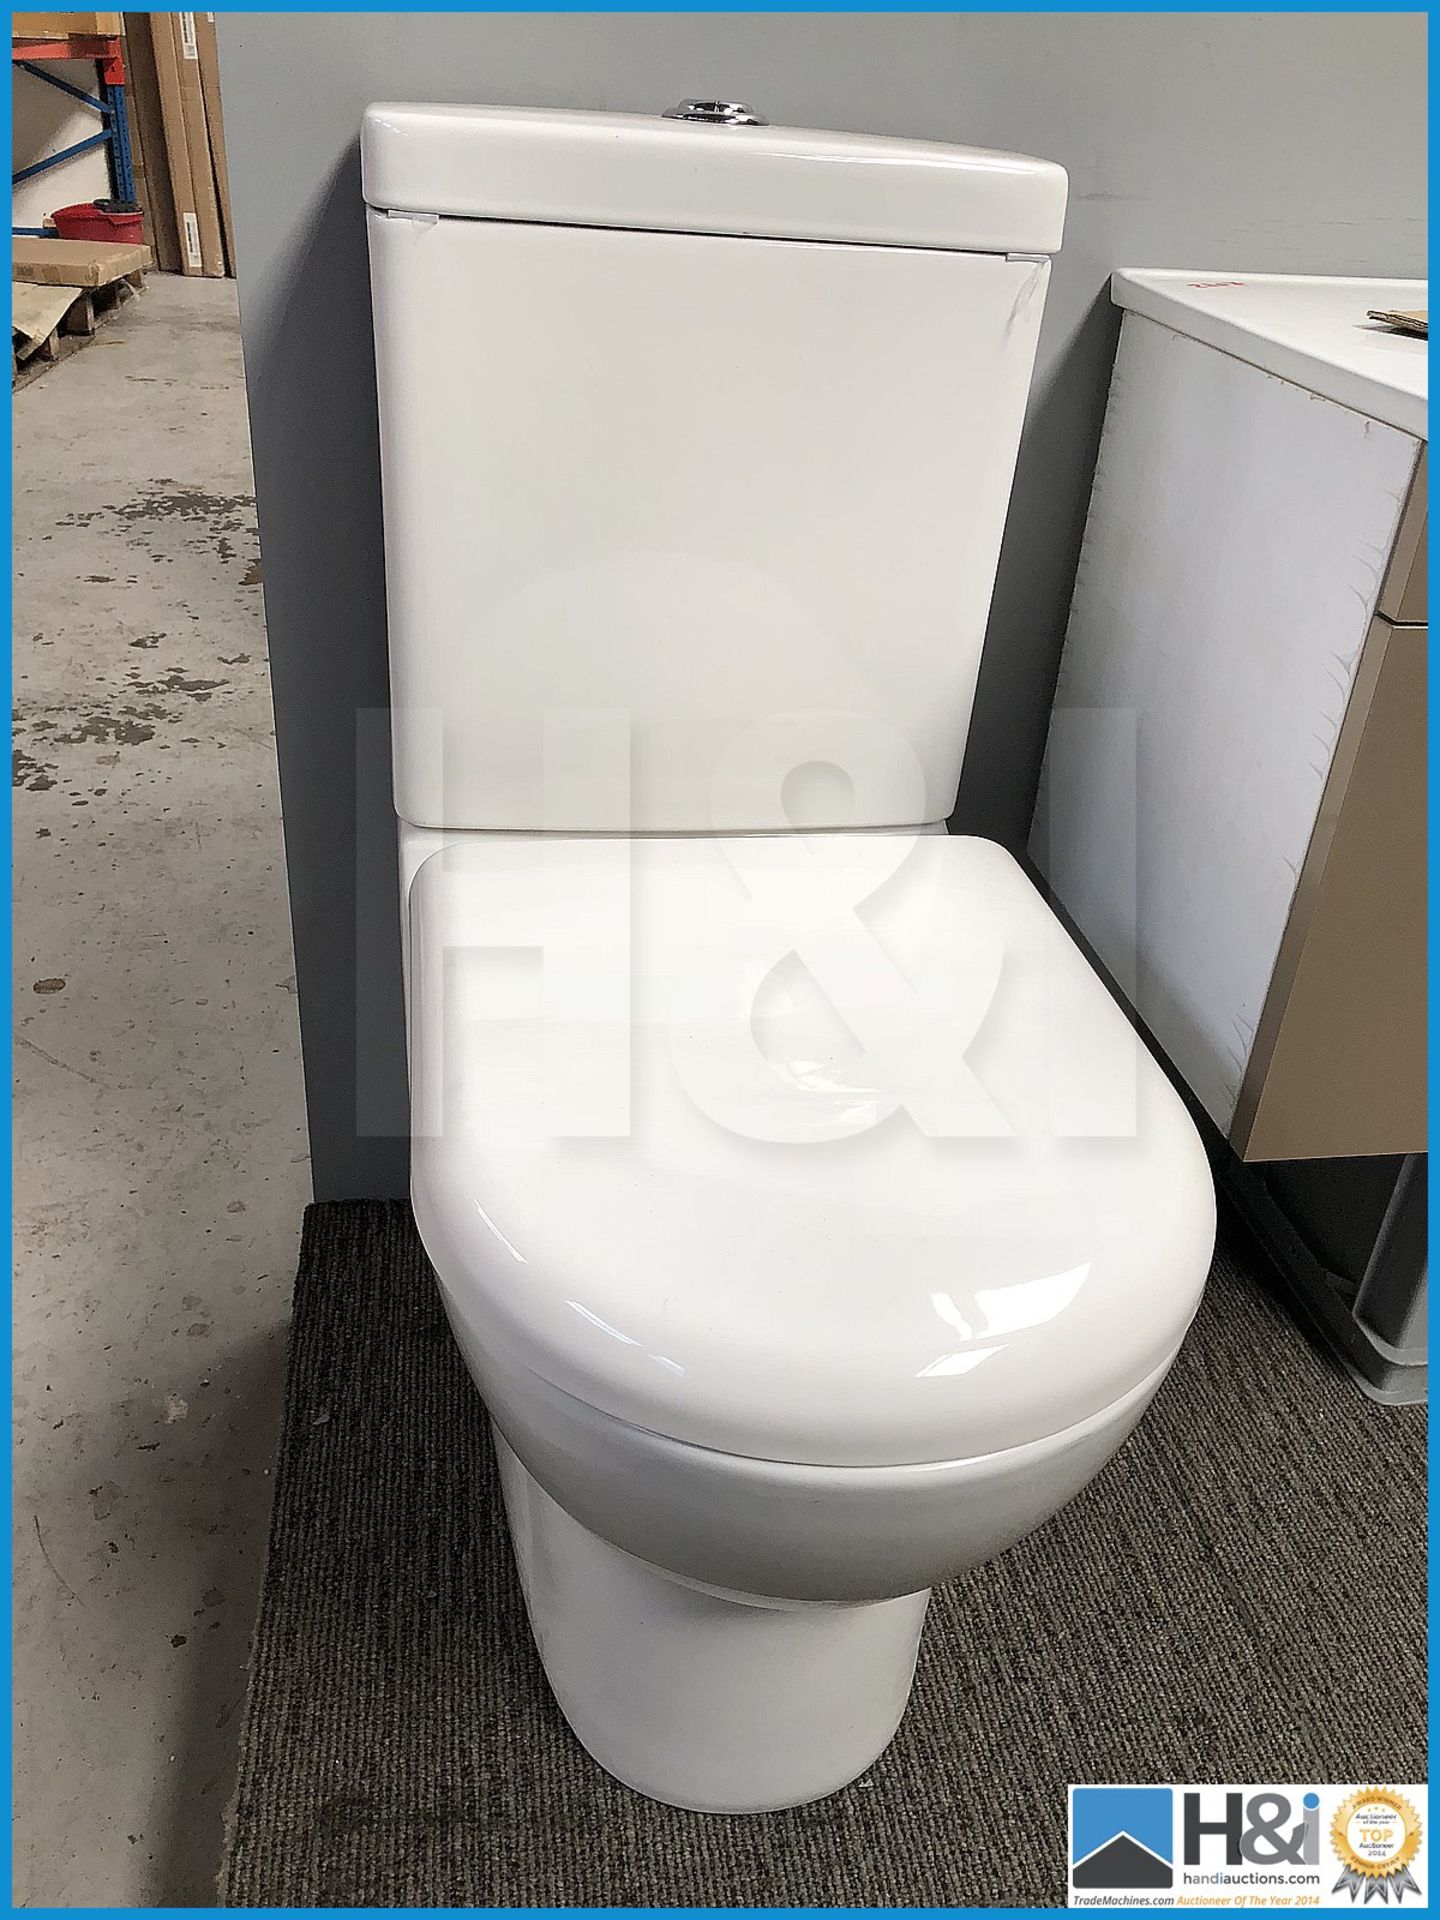 Designer K-014 contemporary WC with top flush and soft close seat .New and boxed. Suggested Manufact - Image 2 of 3